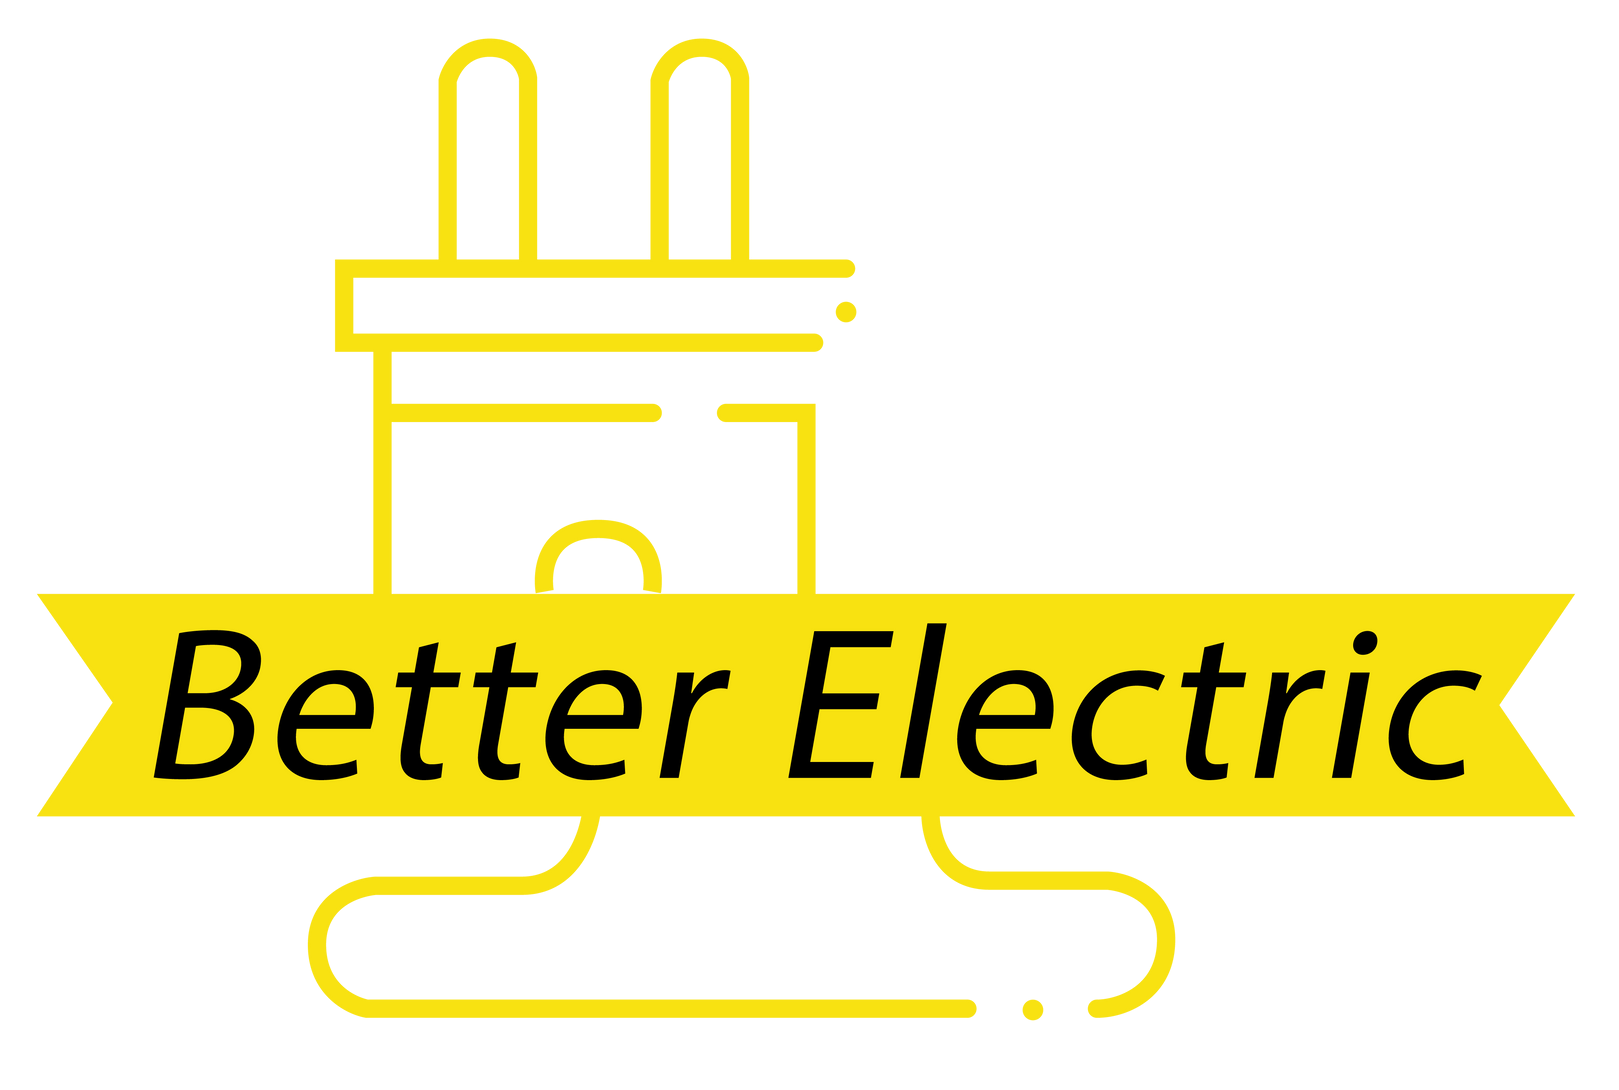 Better Electric